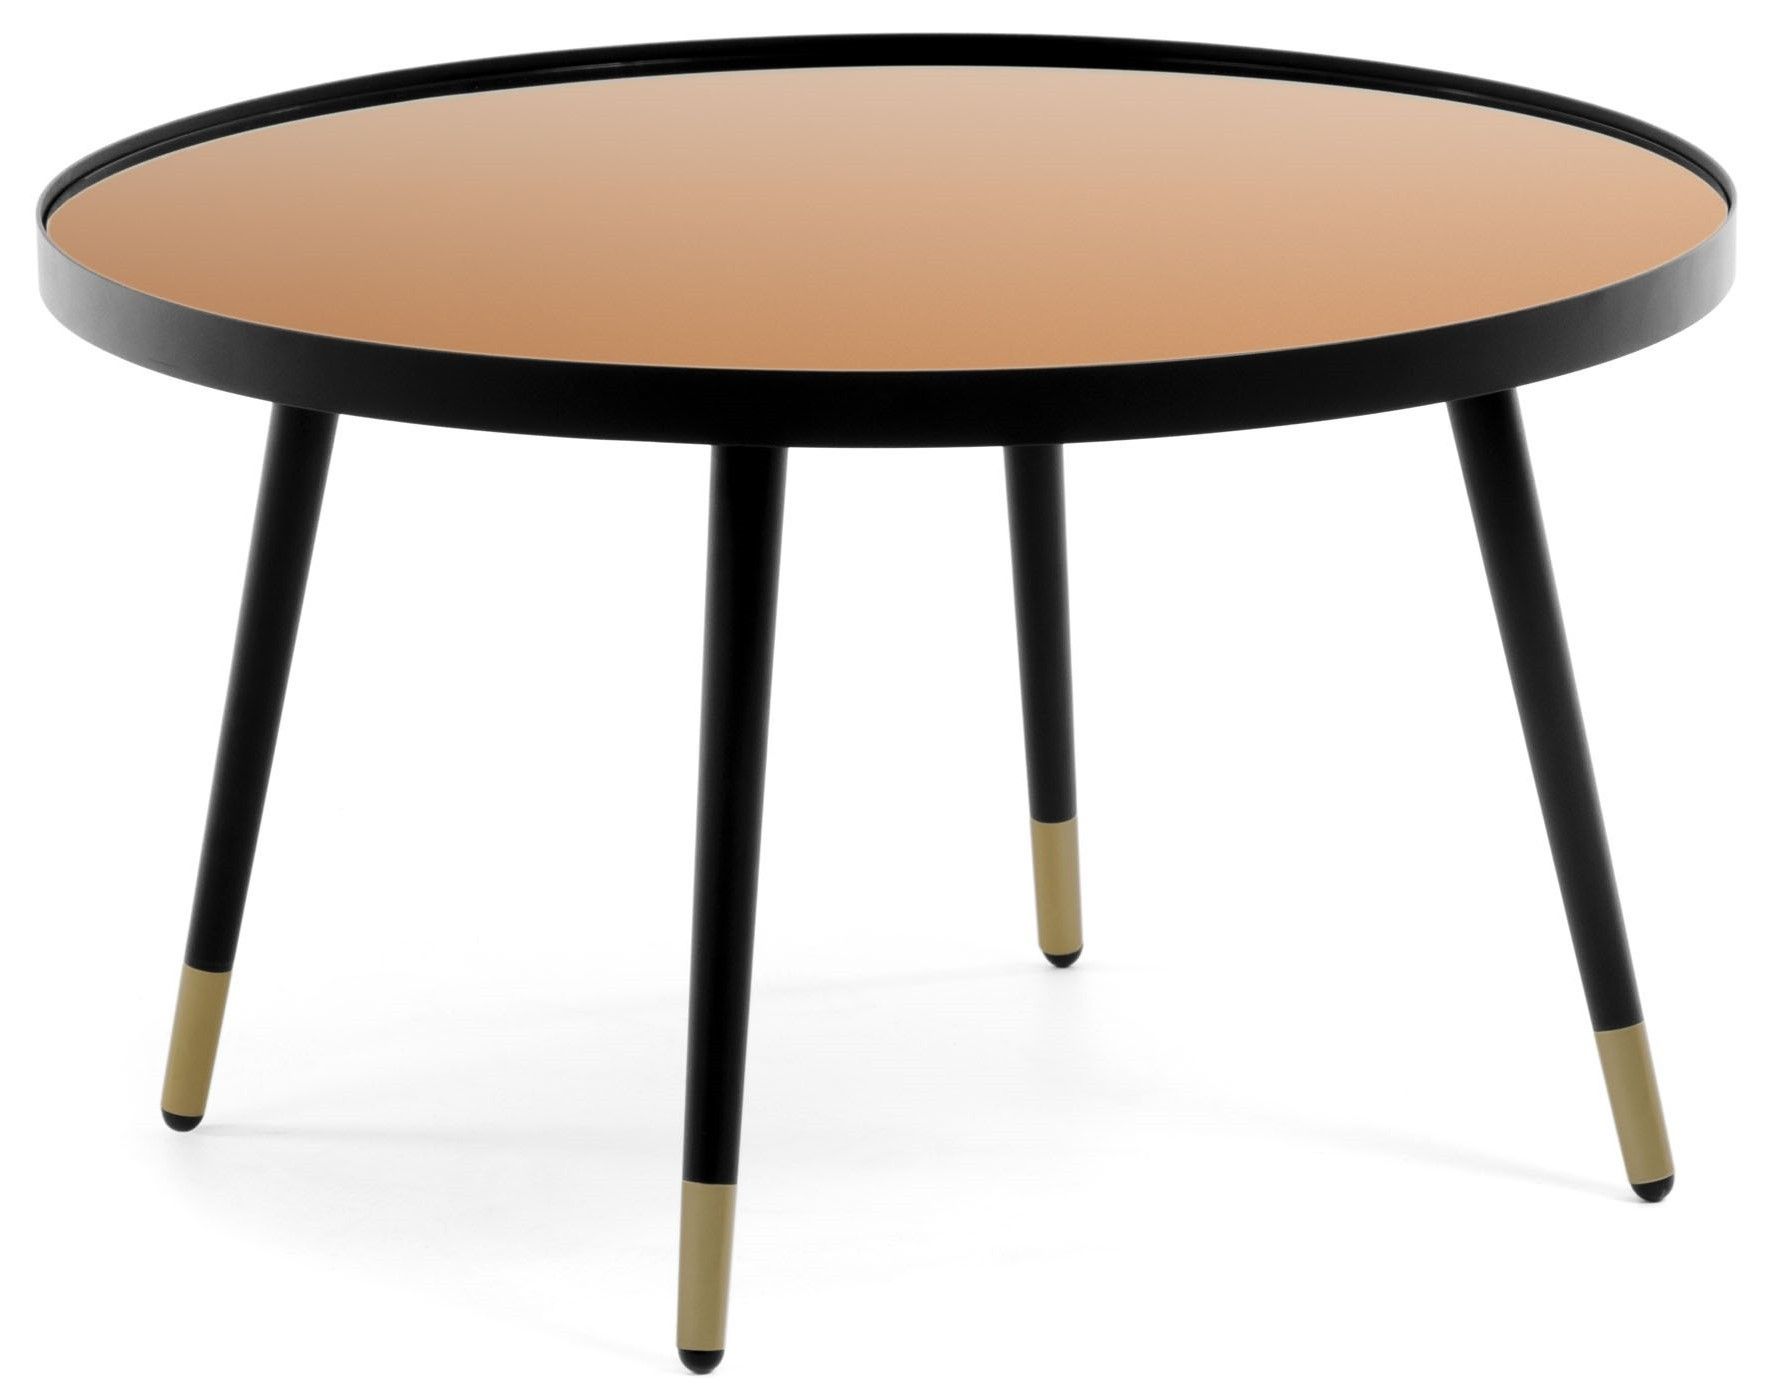 Daila Diam 80 Cm Round In Metal And Tempered Glass Top Home Design Coffee  Table Pertaining To Tempered Glass Top Coffee Tables (View 2 of 15)